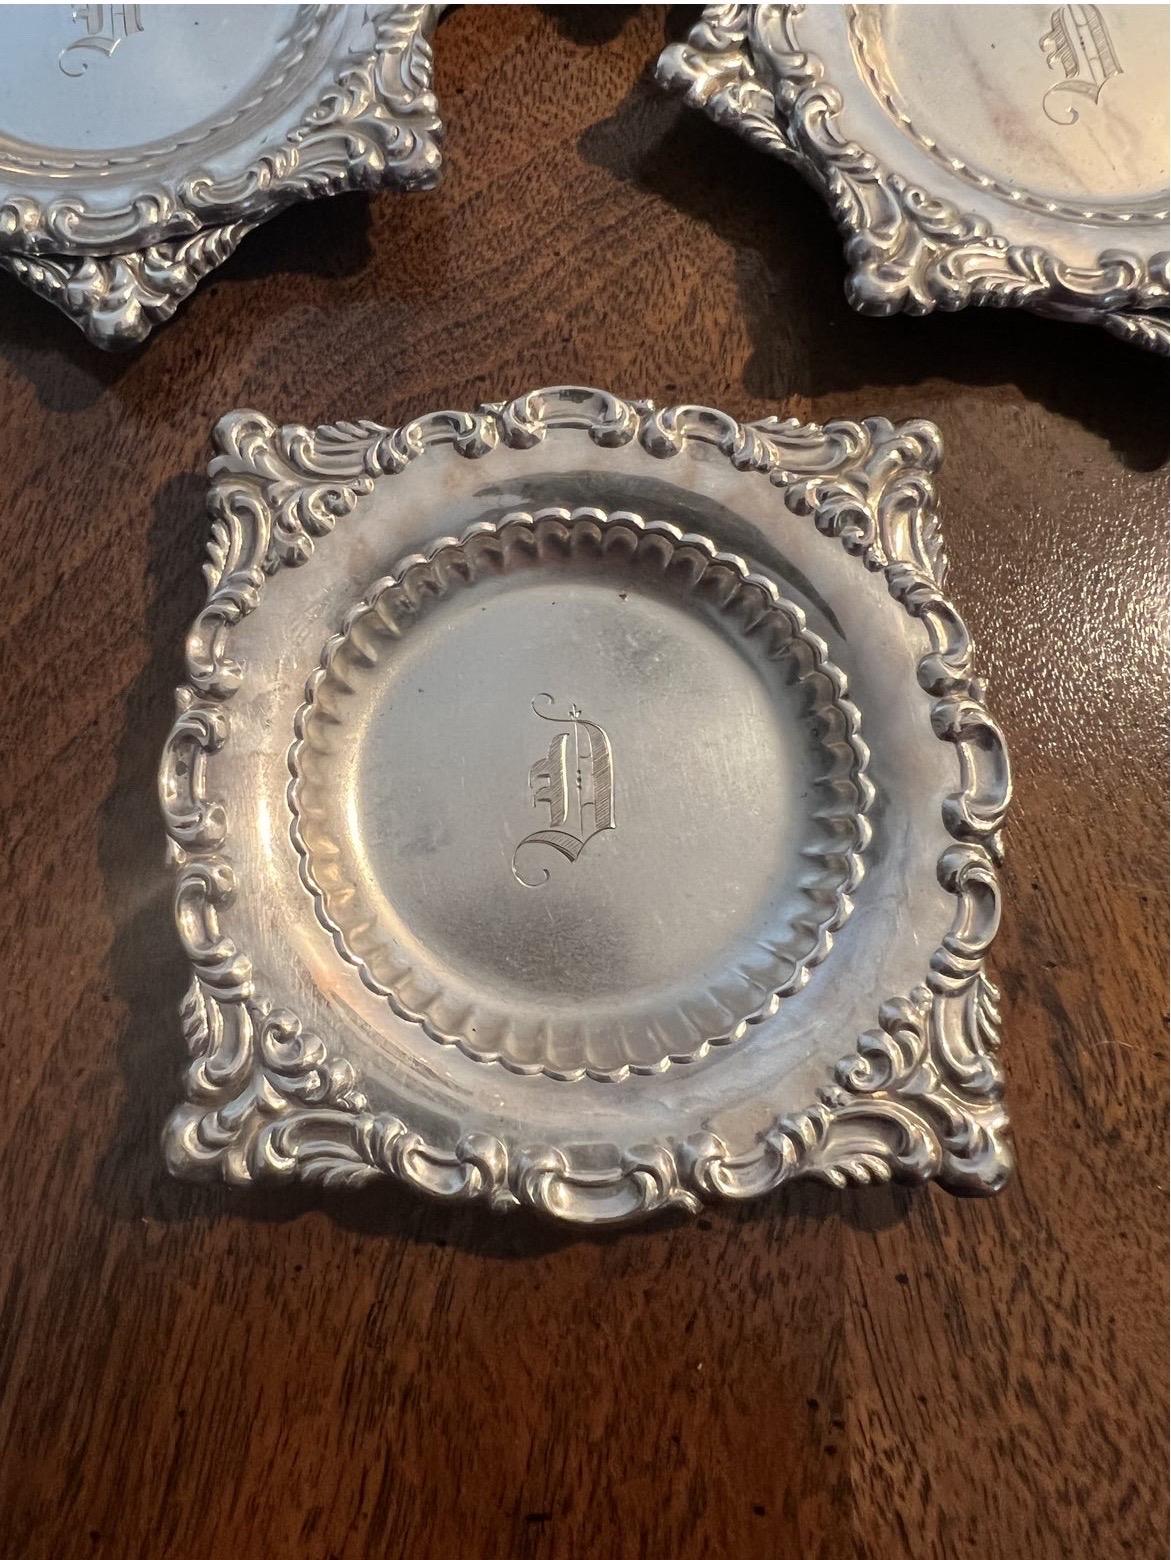 Set of 11 antique early 20th century sterling silver butter pats by Dominick & Haff. Each with a “D” monogram to bowl and hand chased border. Each roughly 26 grams - 289grams total weight.